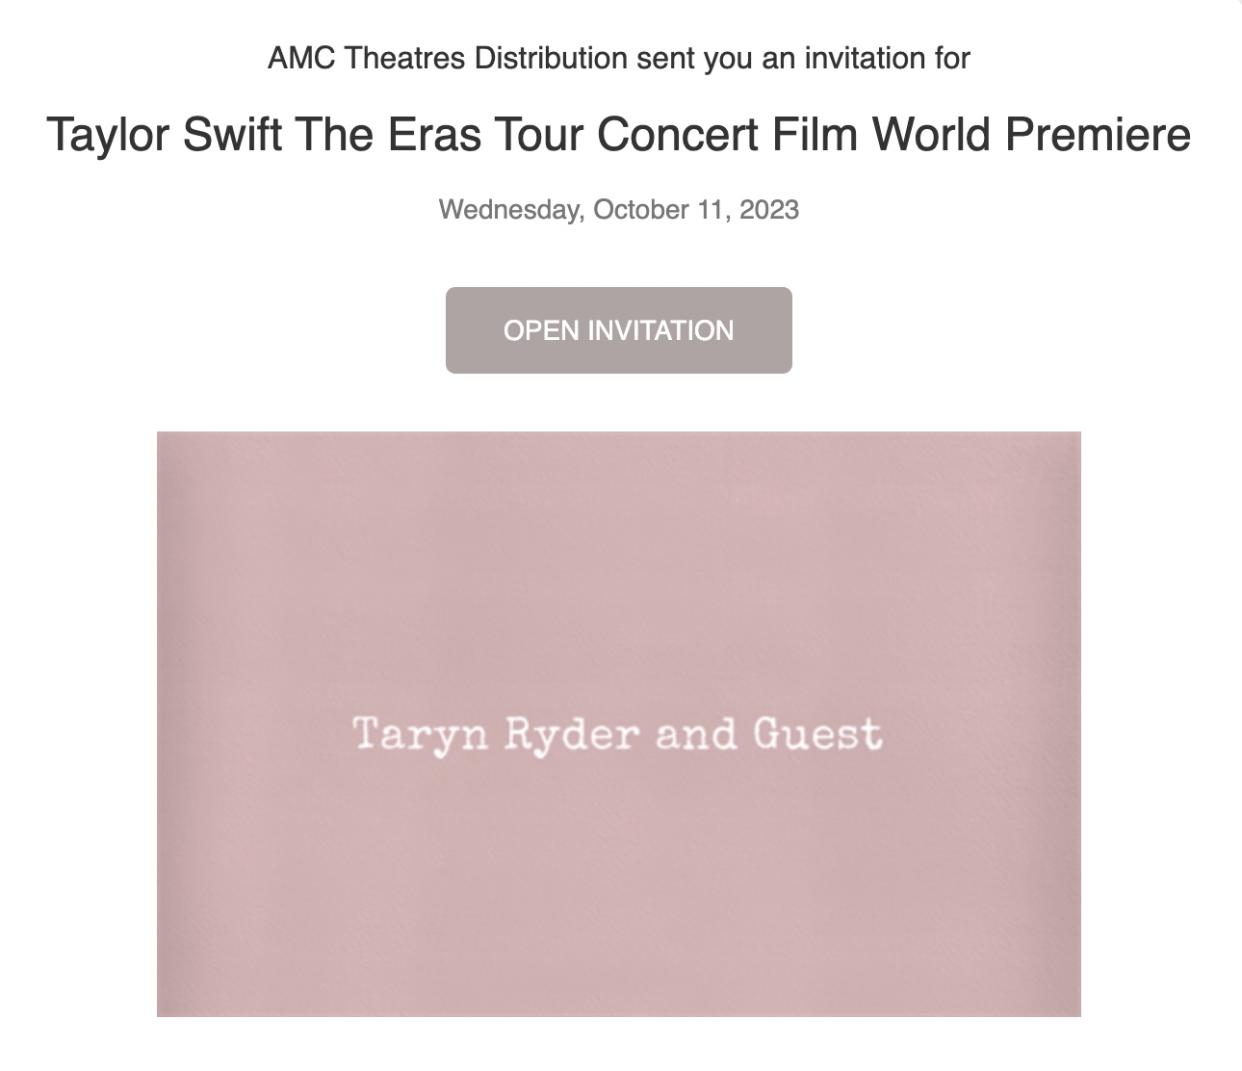 A look at the e-vites for Taylor Swift's concert film premiere.